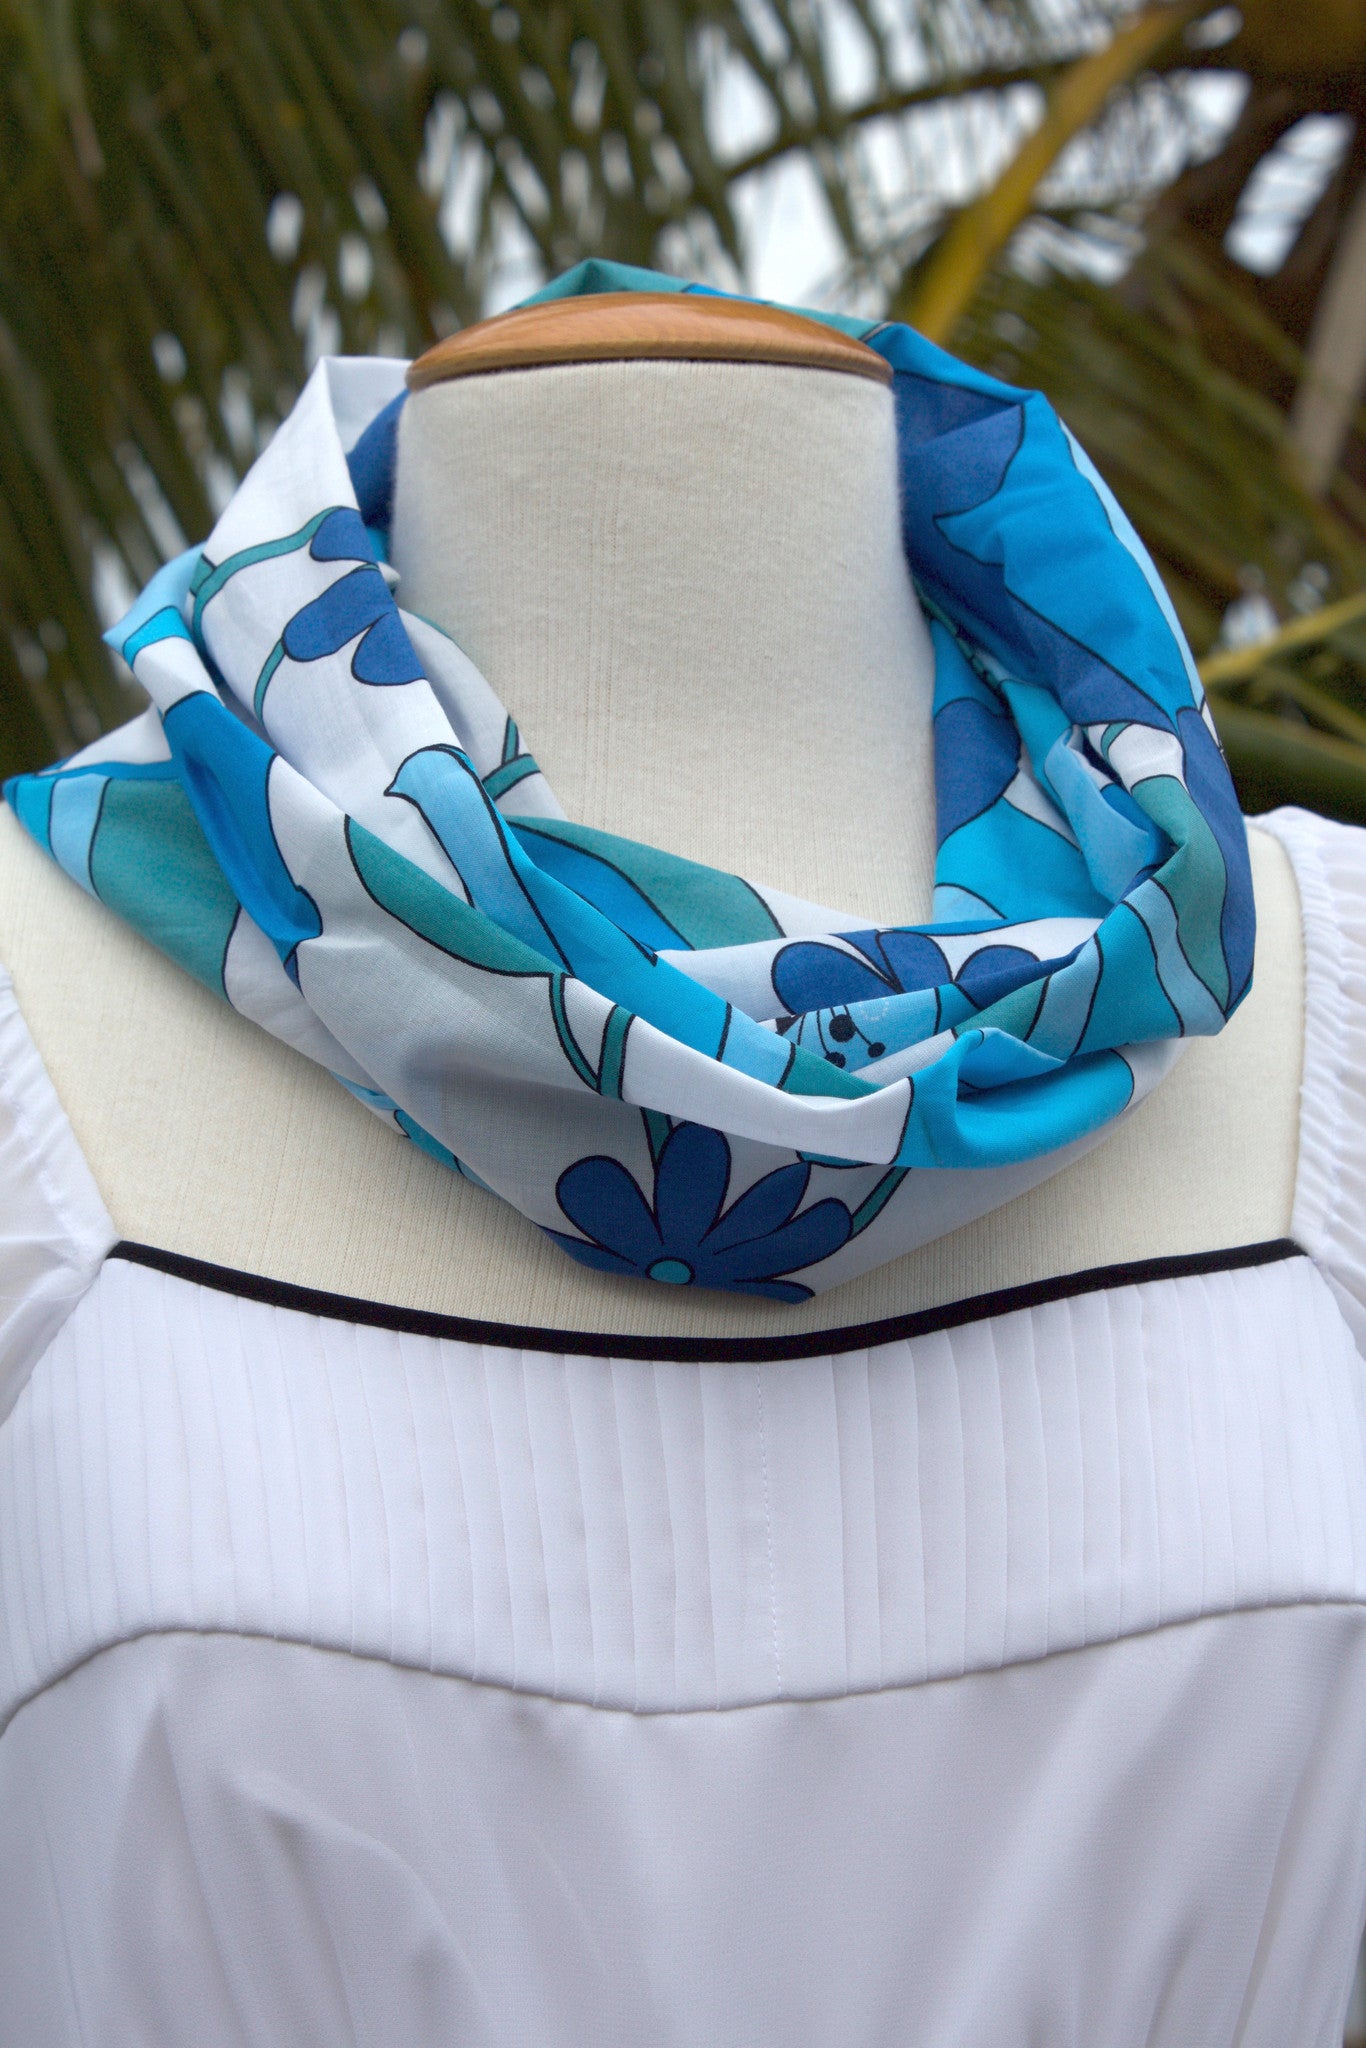 Shades of Blue Infinity Scarf-The Blue Peony-Category_Infinity Scarf,Color_Aqua,Color_Blue,Color_White,Department_Personal Accessory,Material_Cotton,Pattern_Floral